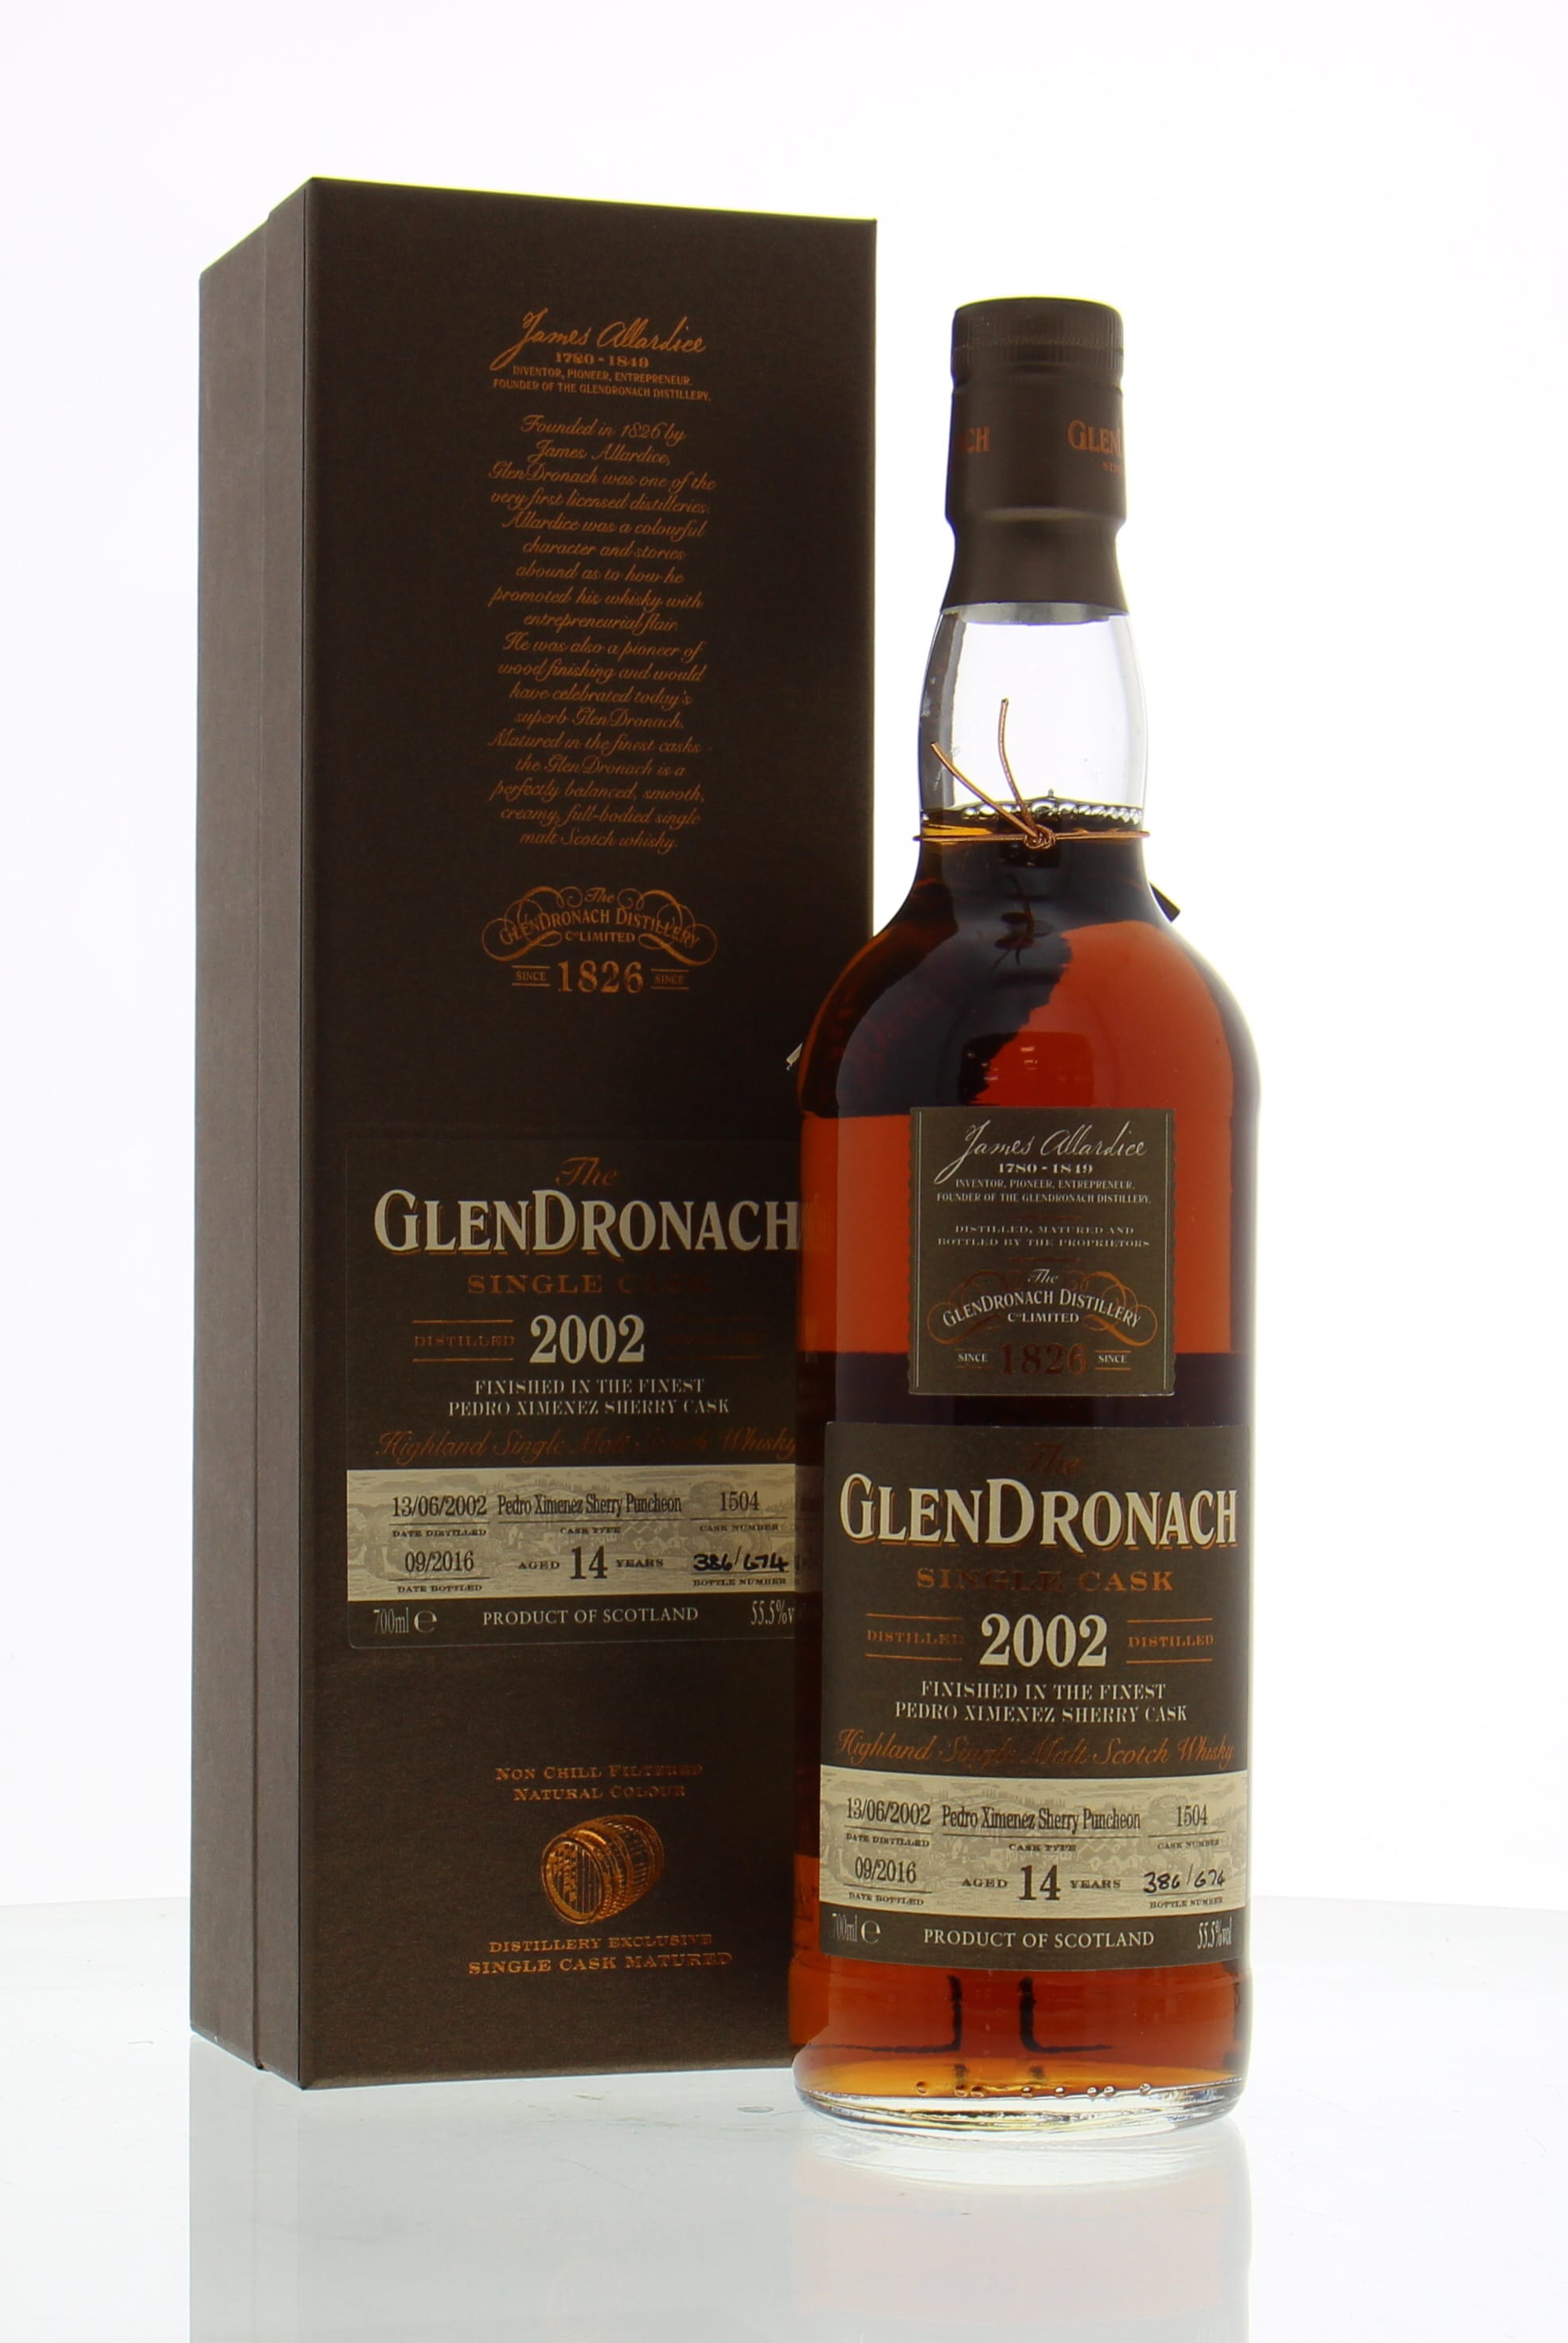 Glendronach - 14 Years Old Batch 14 Cask:1504 55.5% 2002 In Original Container